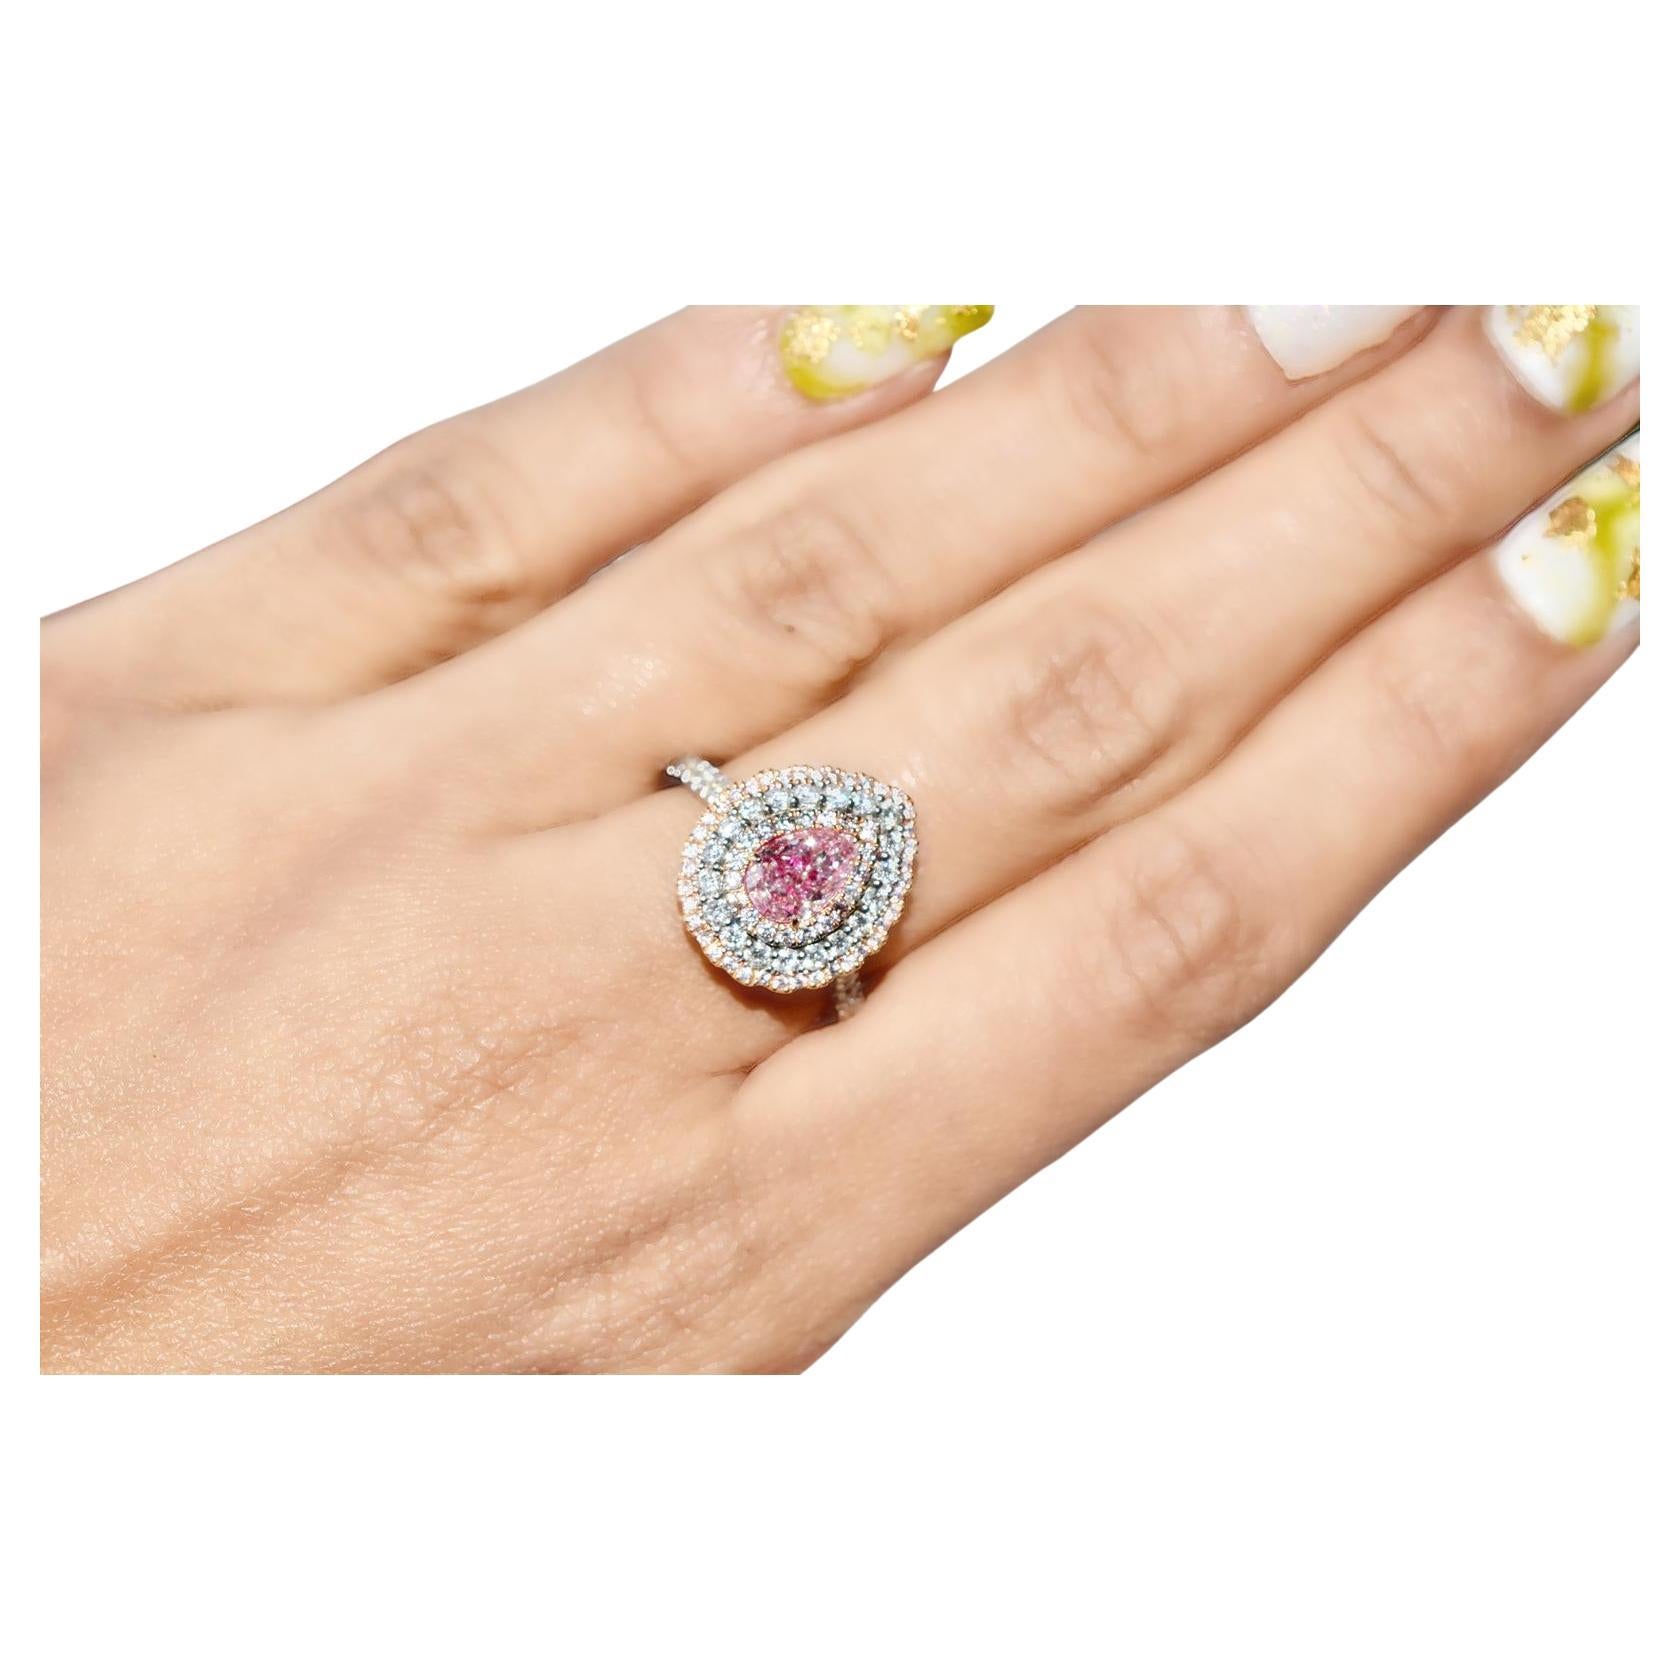 1.00 Carat Light Pinkish Brown Diamond Ring I1 Clarity GIA Certified For Sale